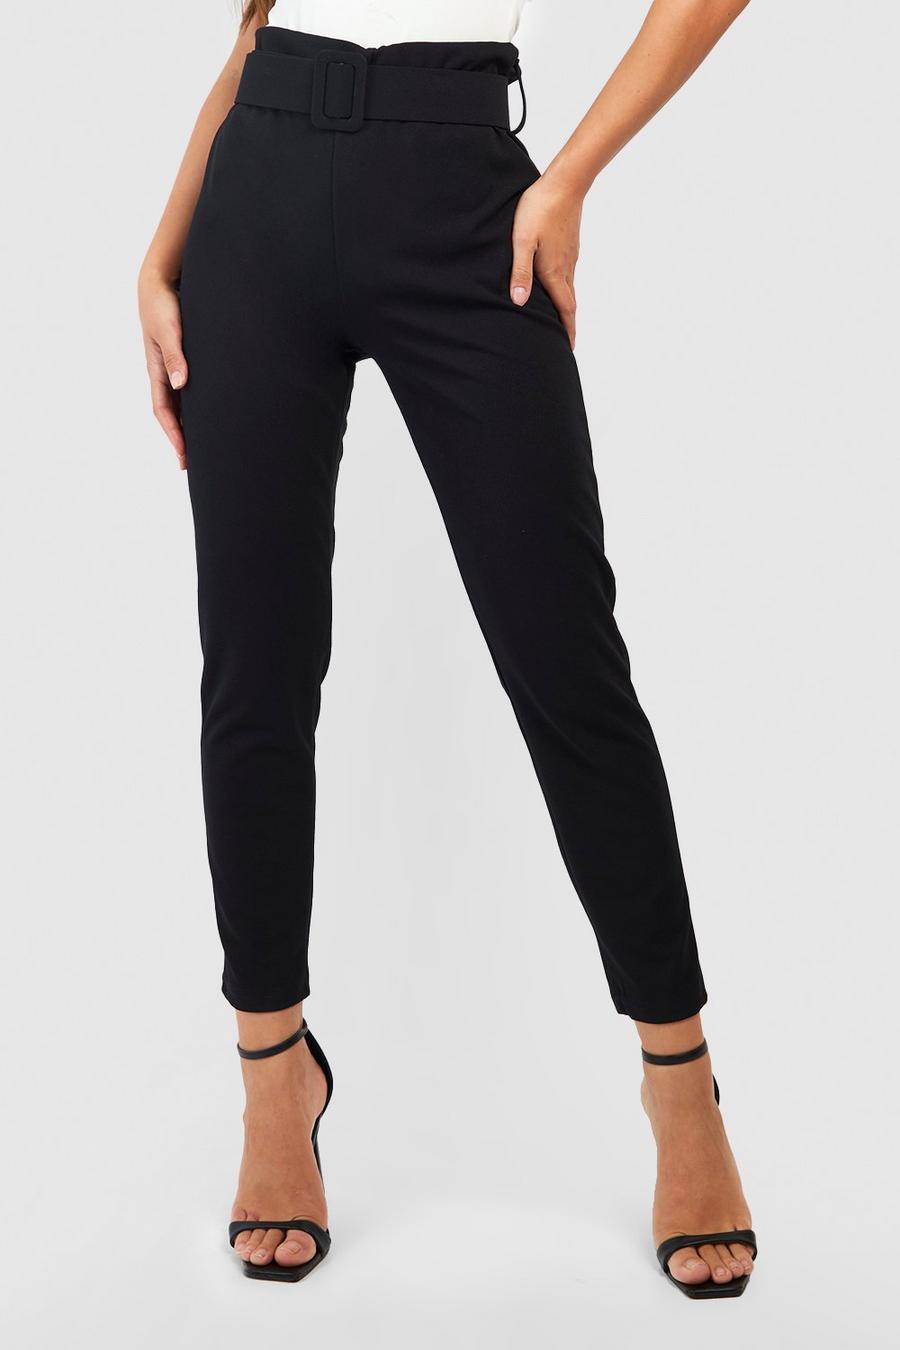 Black High Waisted Buckle Belted Cigarette Trousers